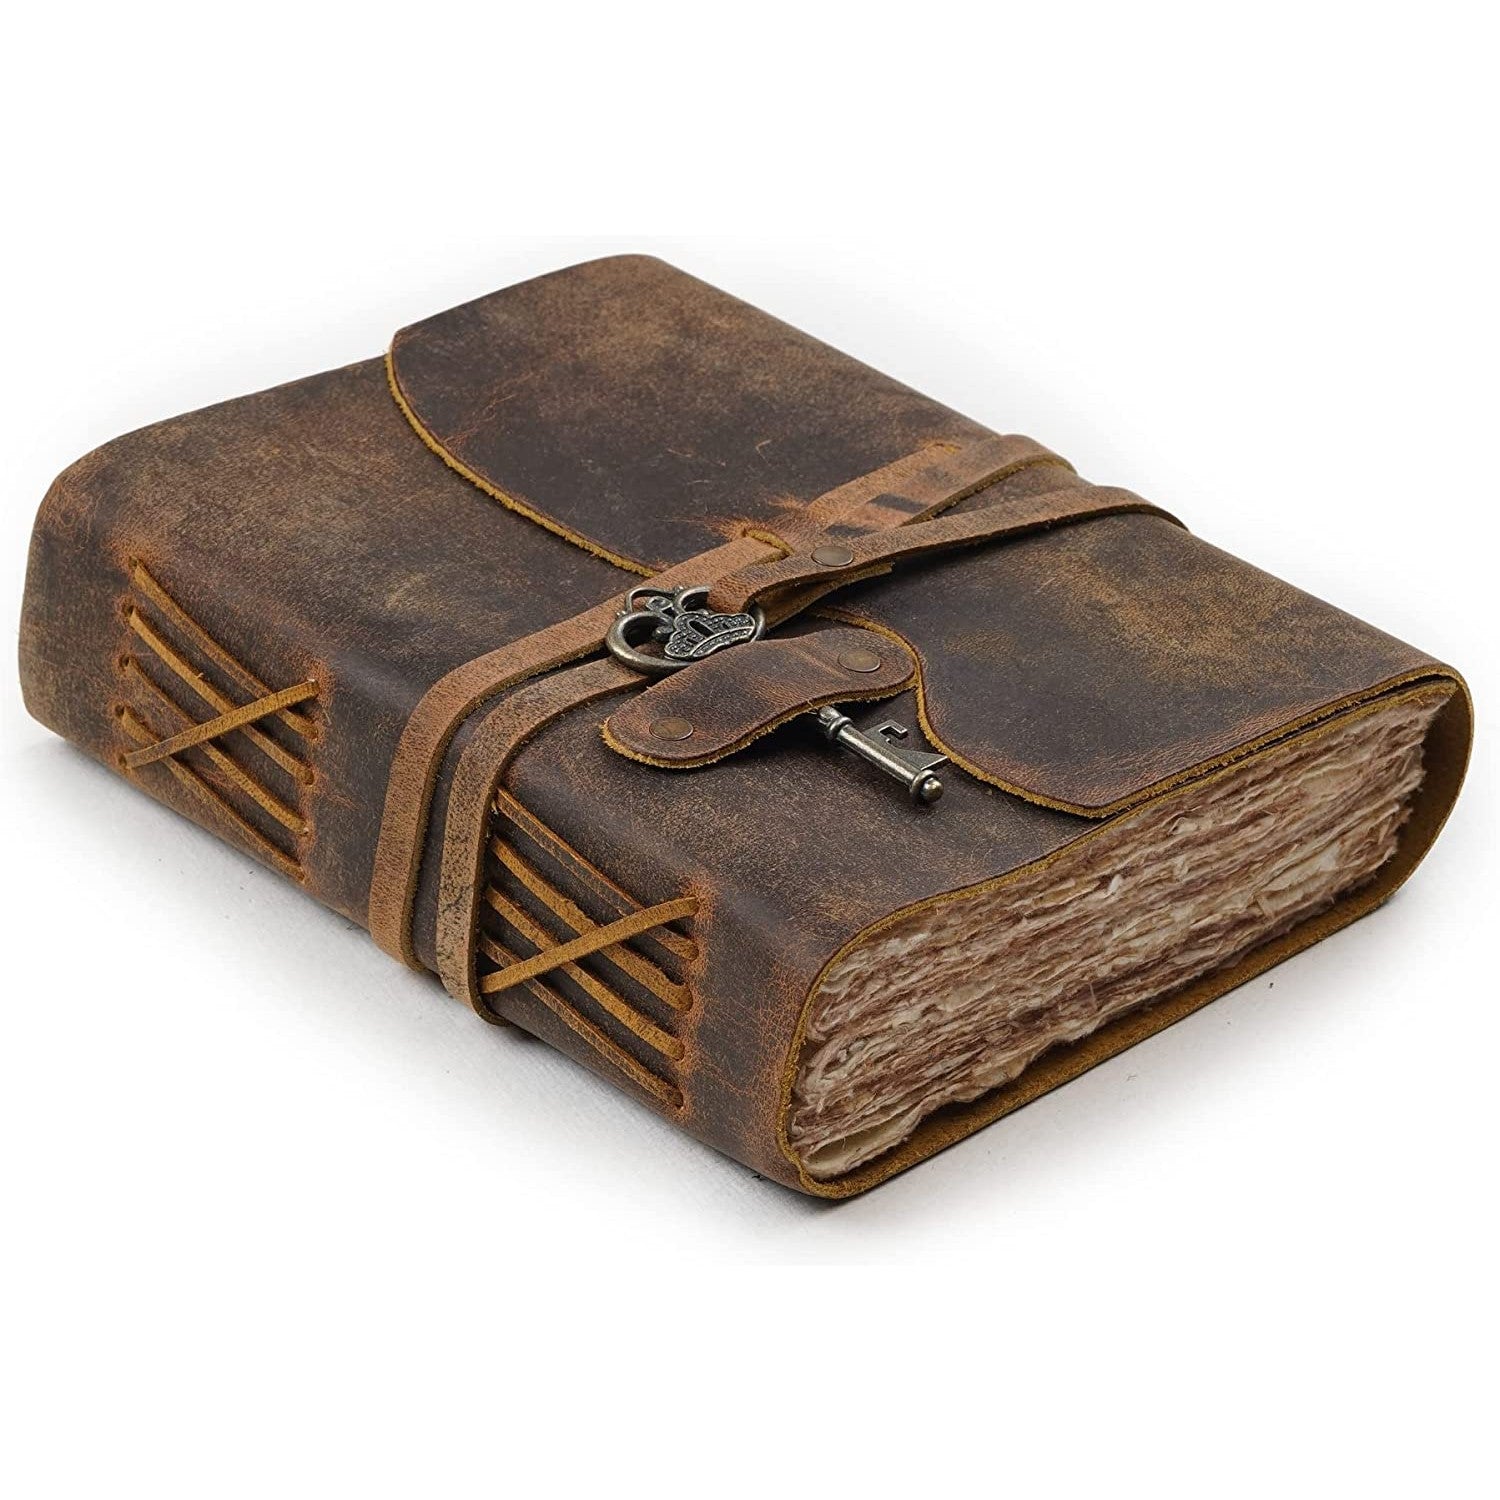 A brown leather vintage journal with key.